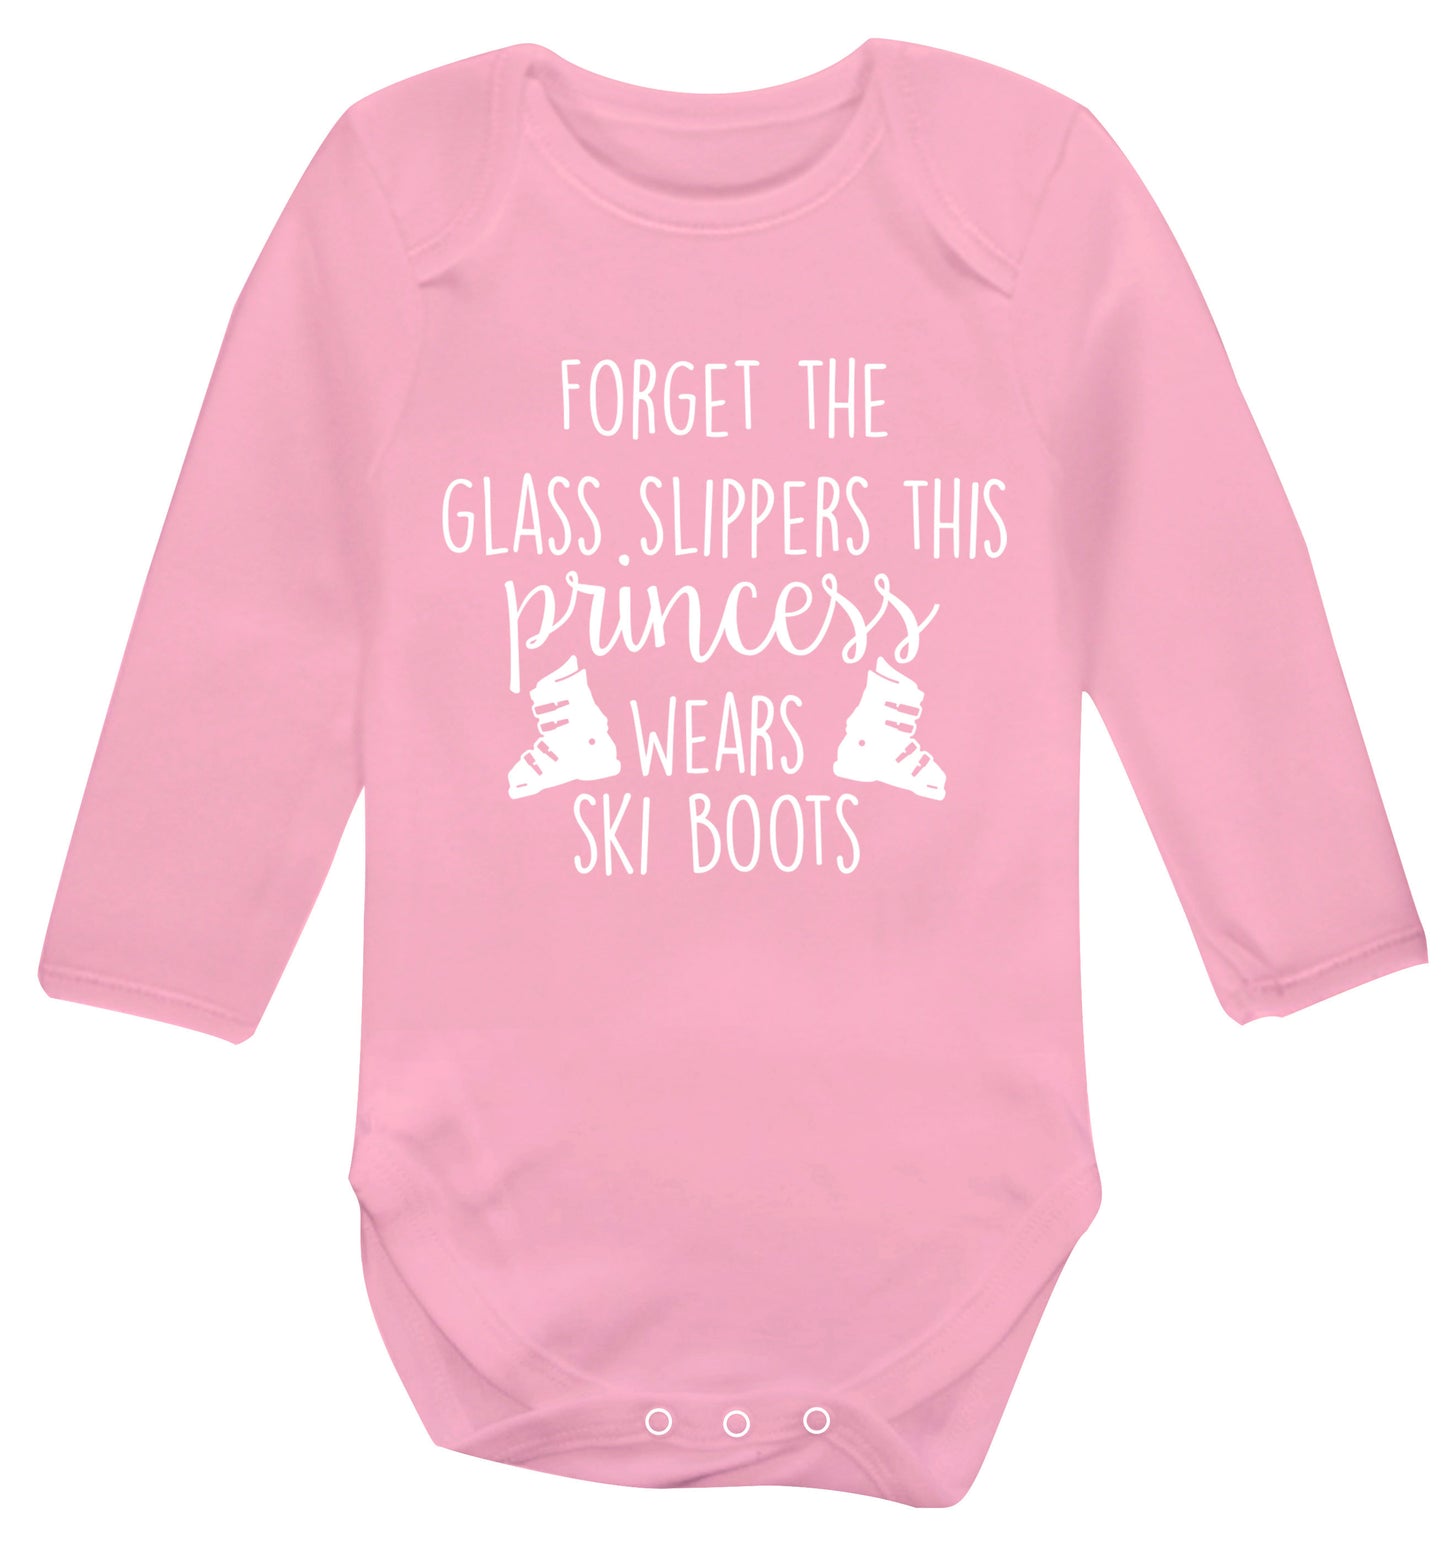 Forget the glass slippers this princess wears ski boots Baby Vest long sleeved pale pink 6-12 months